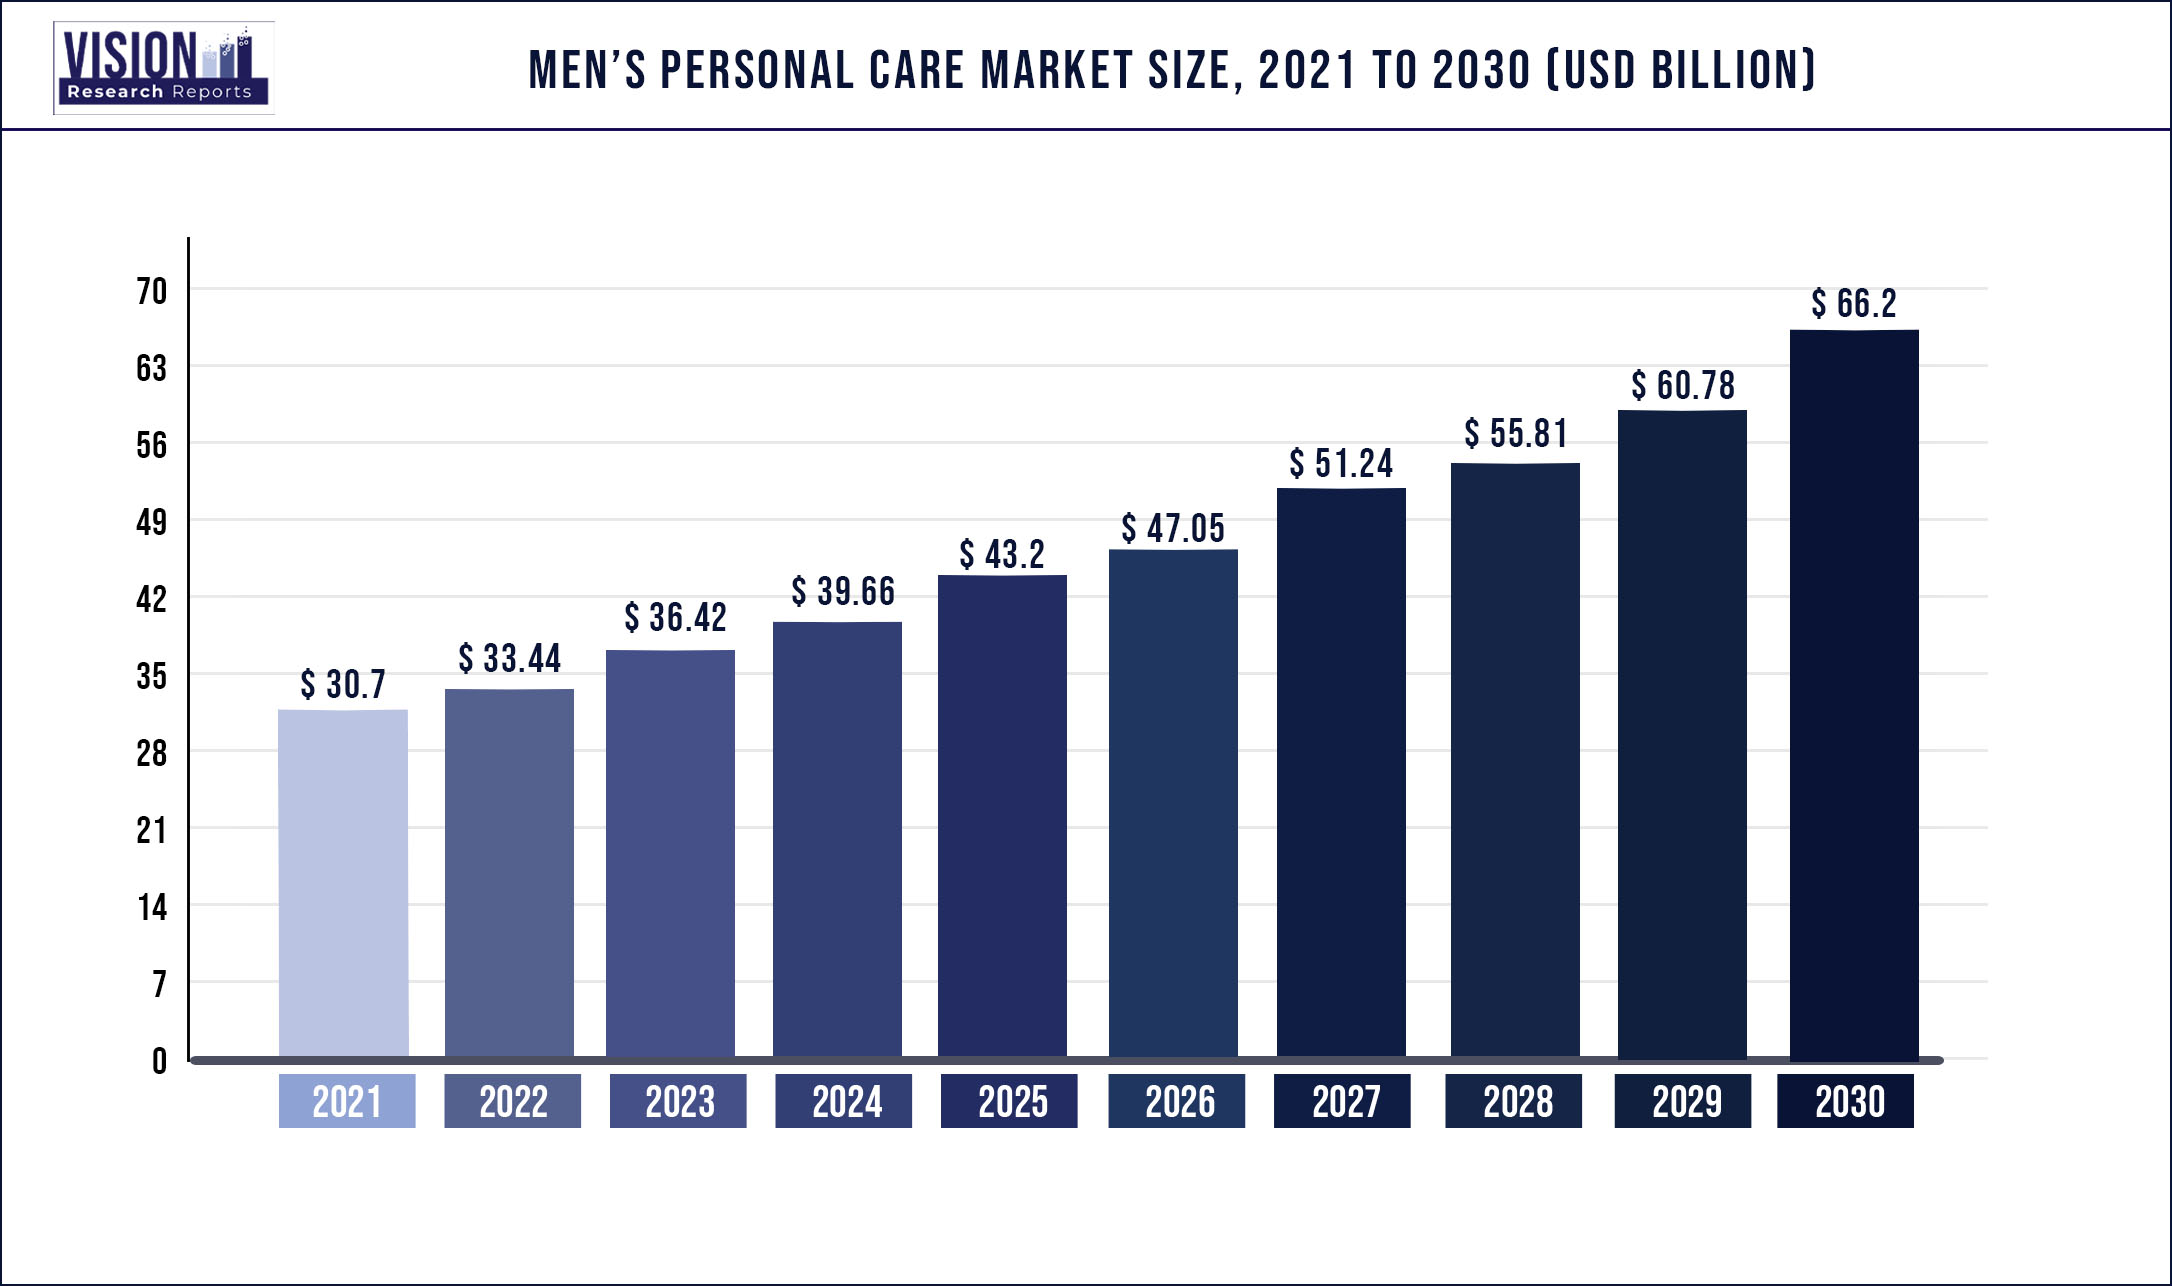 Men’s Personal Care Market Size 2021 to 2030